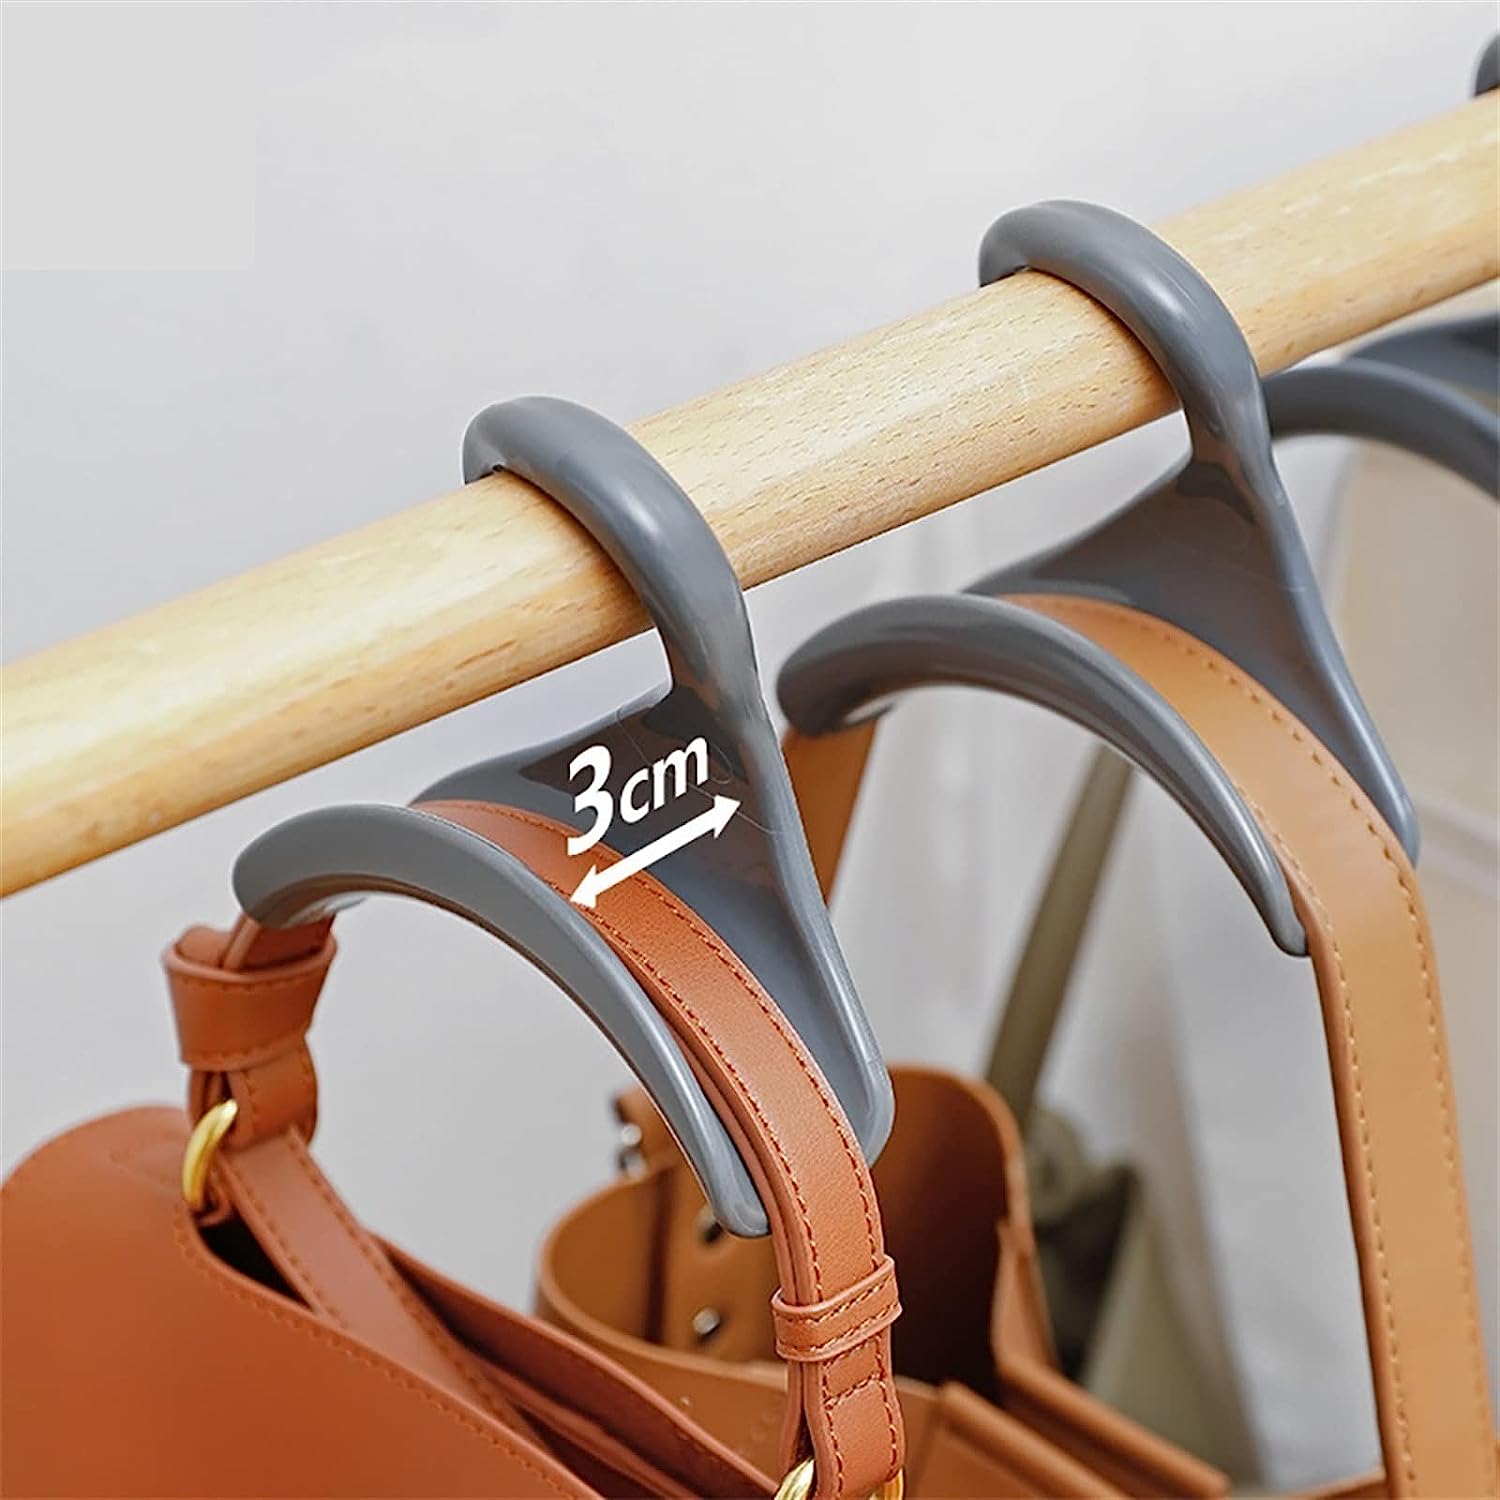 Neatly arranged rack featuring multiple bags suspended on space-saving hanger hooks, perfect for organizing bags, belts, and scarves in a compact manner